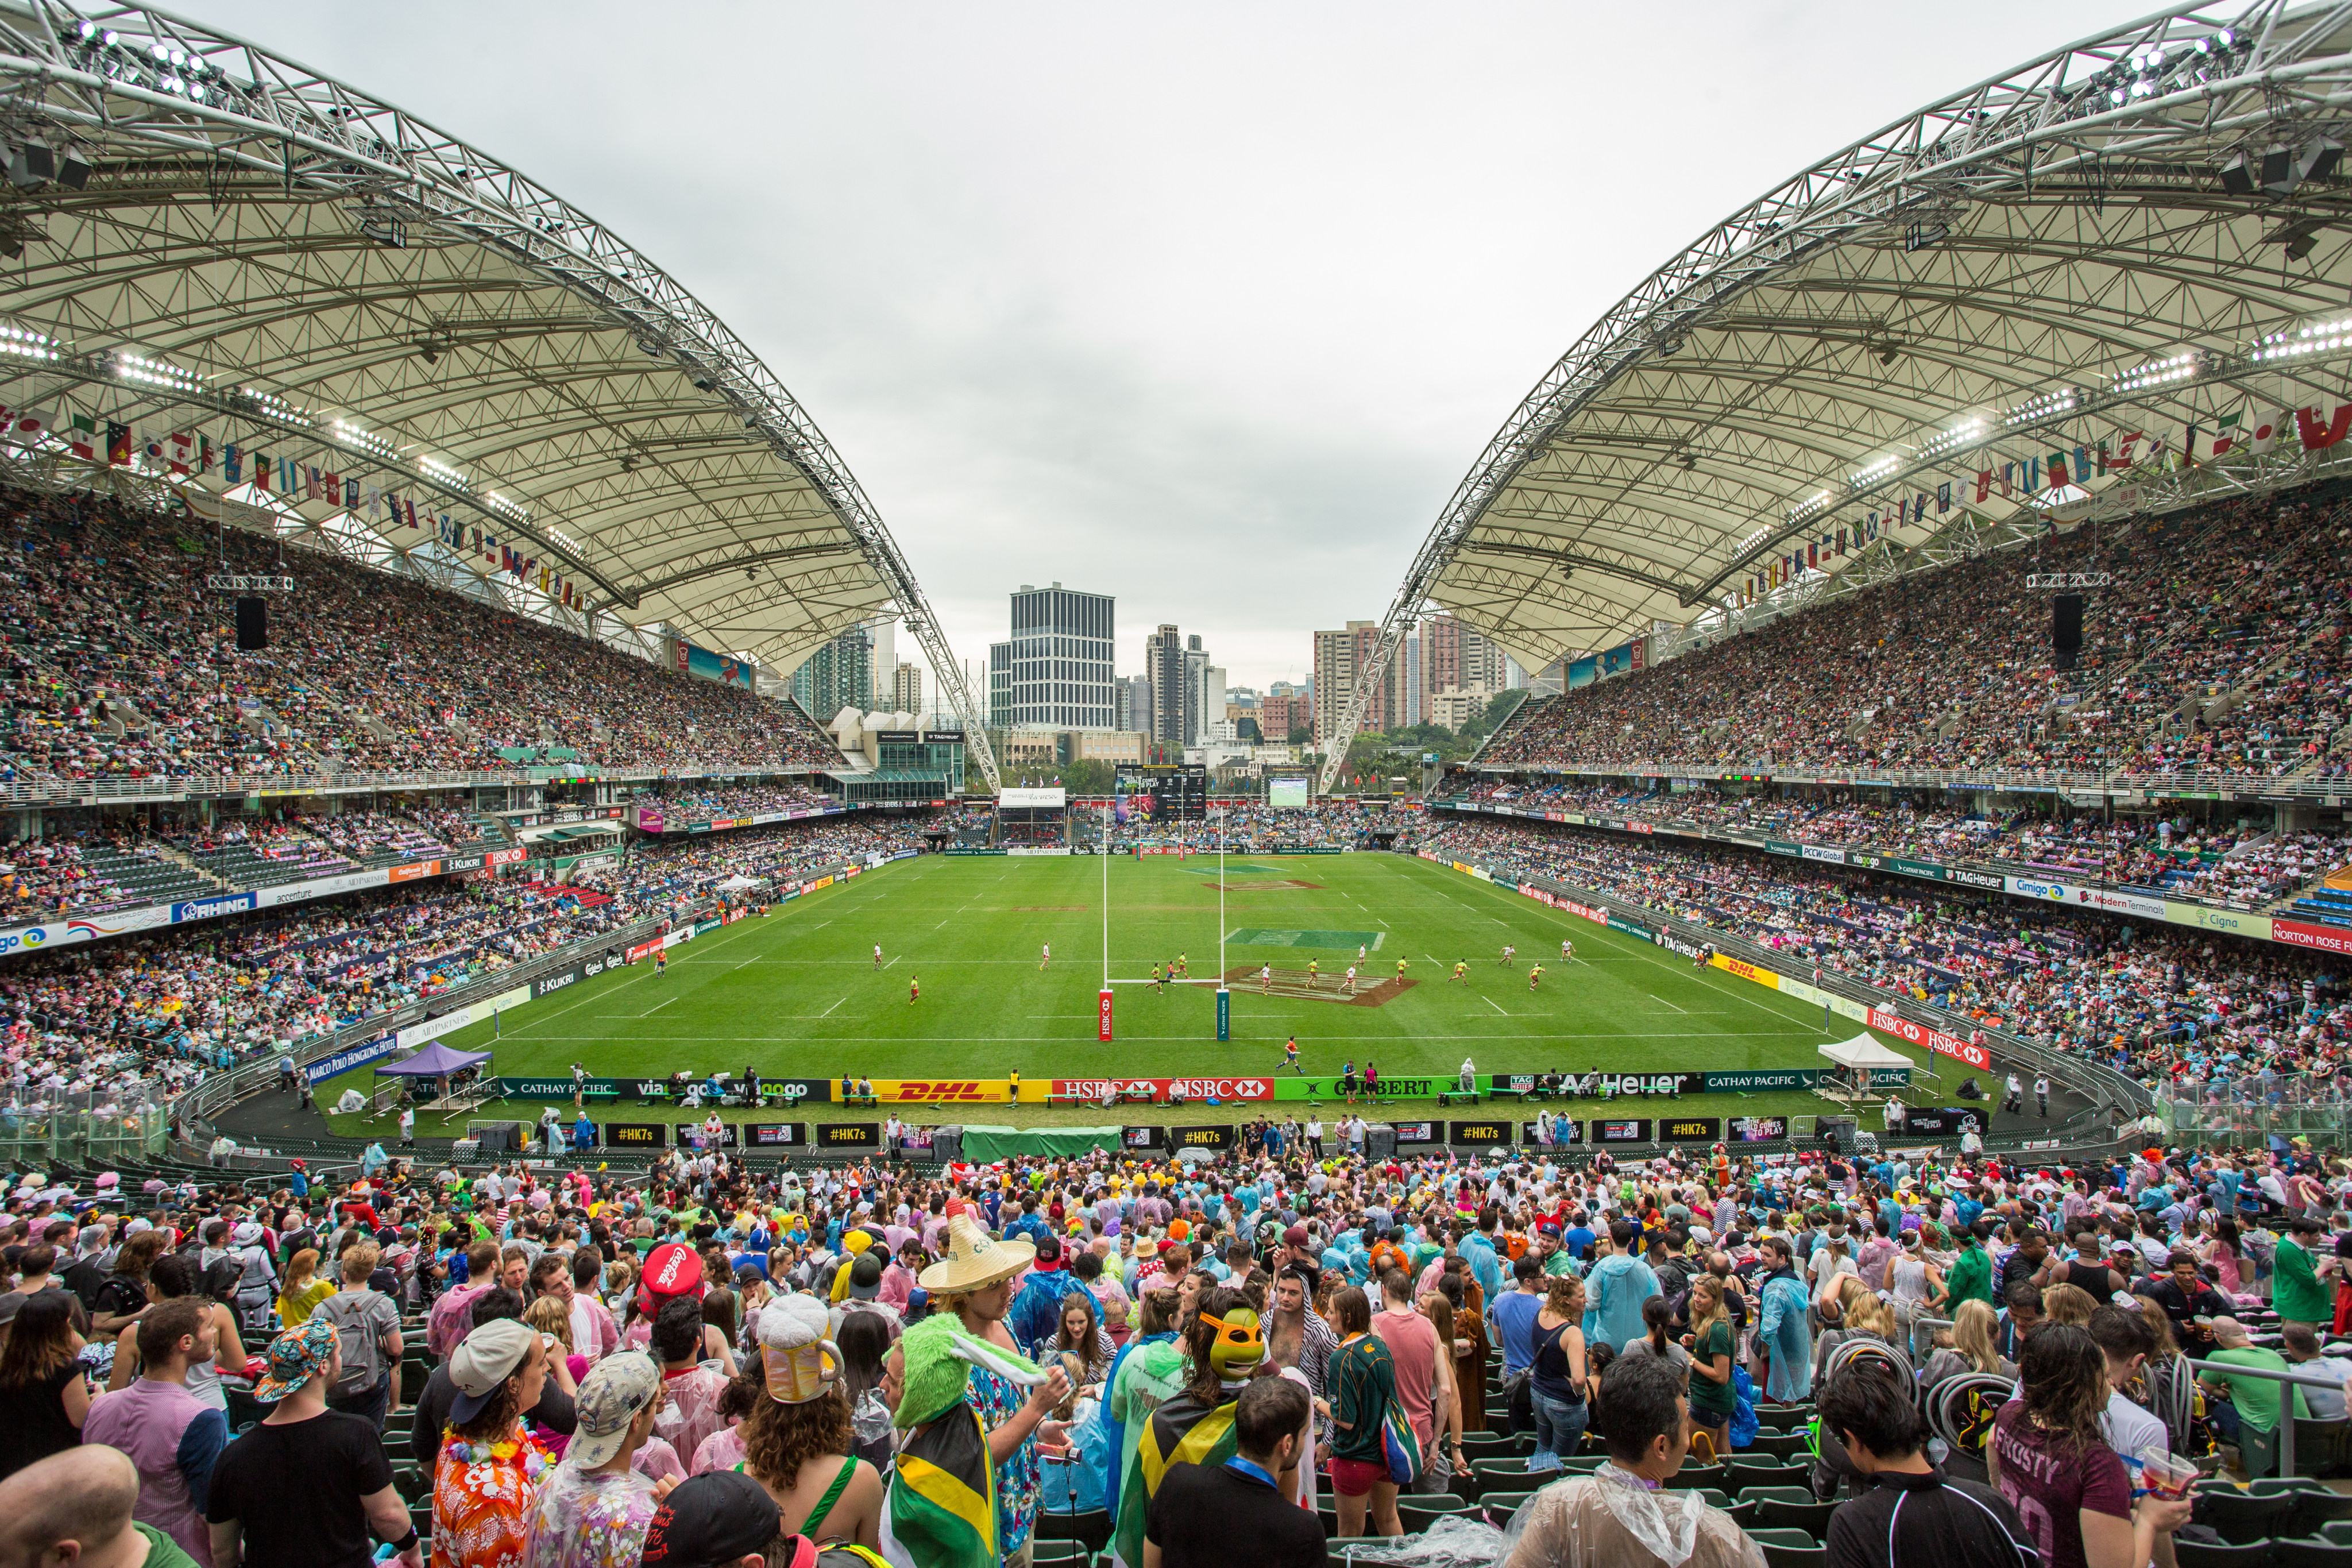 The Hong Kong Sevens will return in November, although spectator numbers are expected to be limited. Photo: Handout